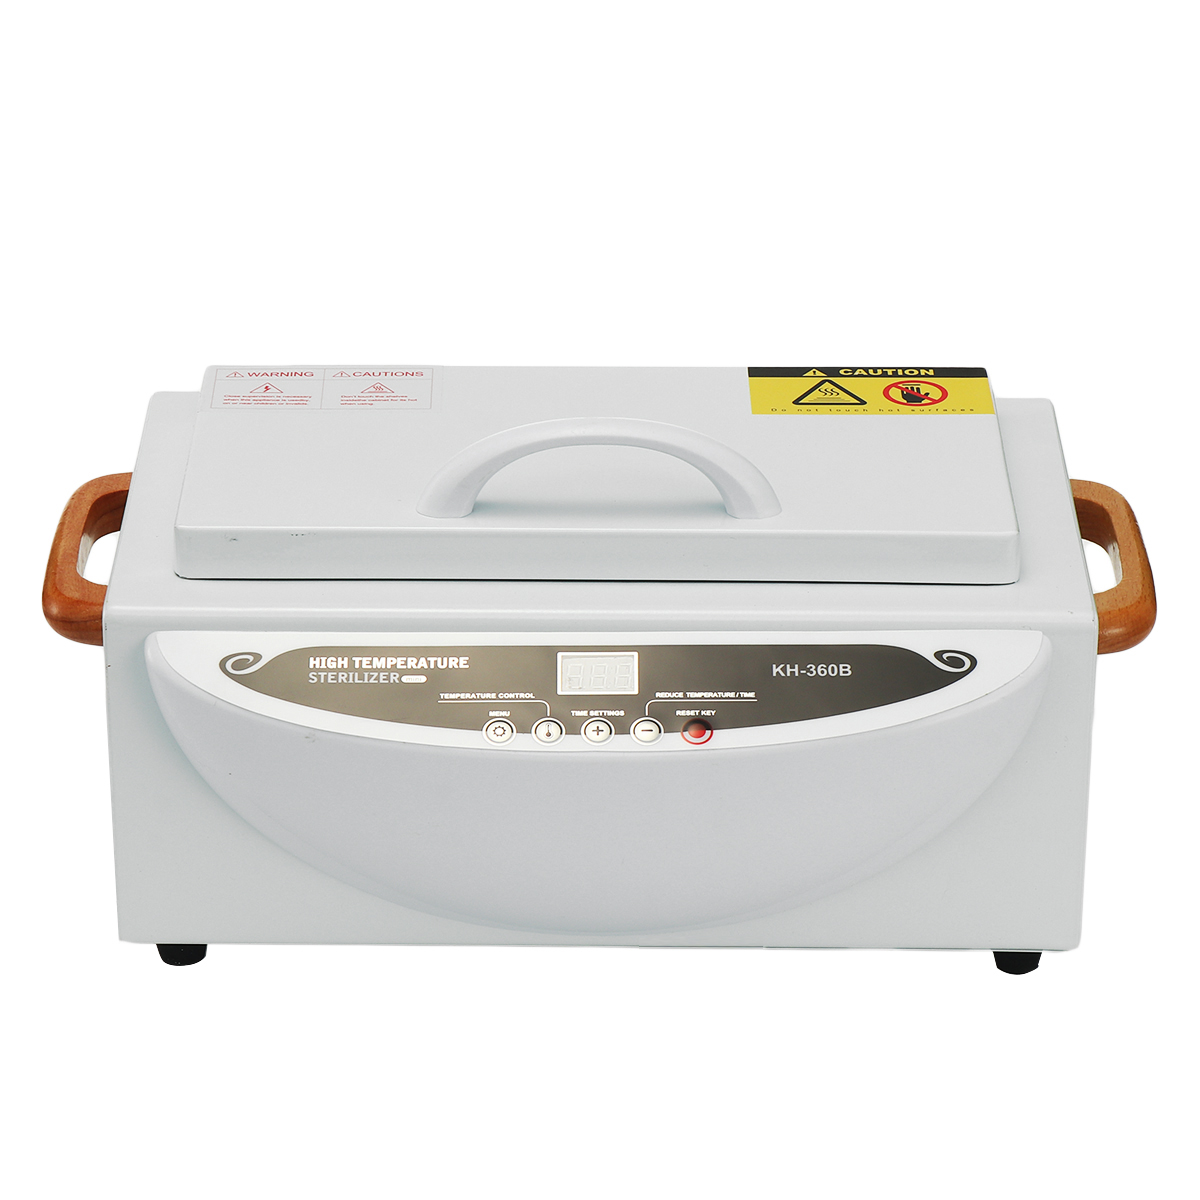 500W-110220V-Spa-Sterilizer-Beauty-Manicure-Nail-Tool-Cabinet-Disinfection-Box-1679830-5